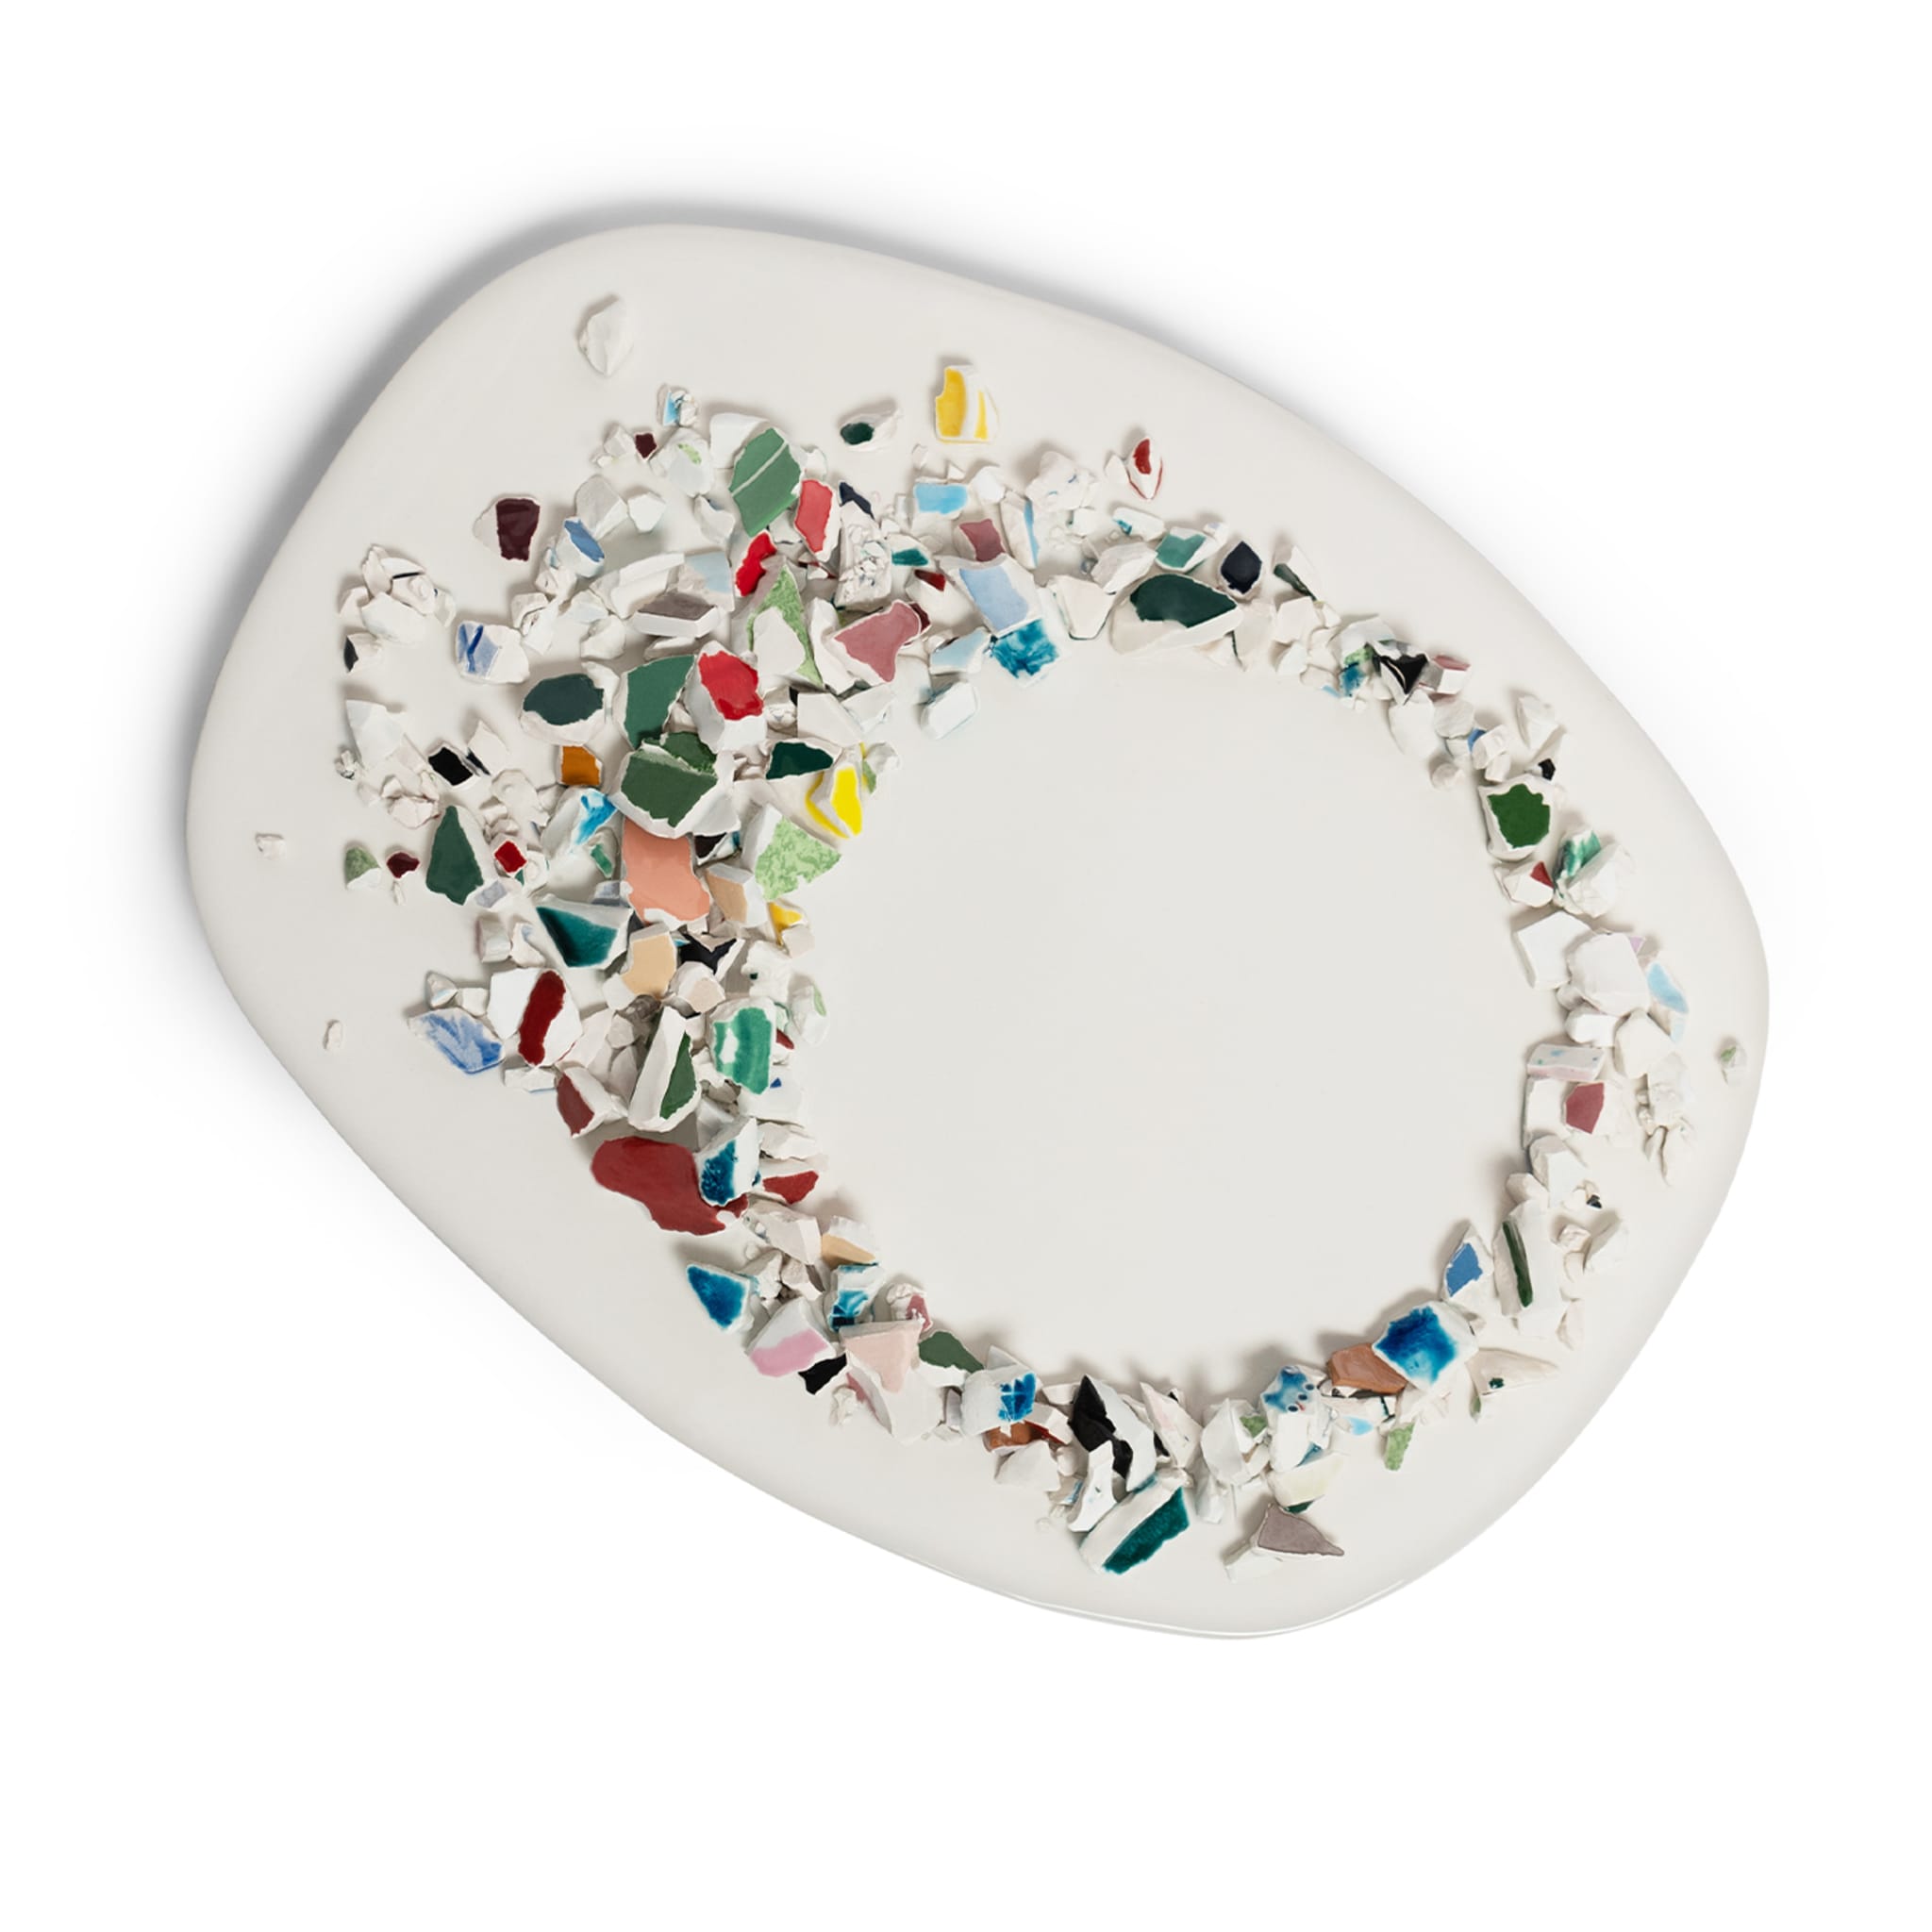 Oval Centerpiece with Polychrome Fragments by Duccio Maria Gambi - Alternative view 1